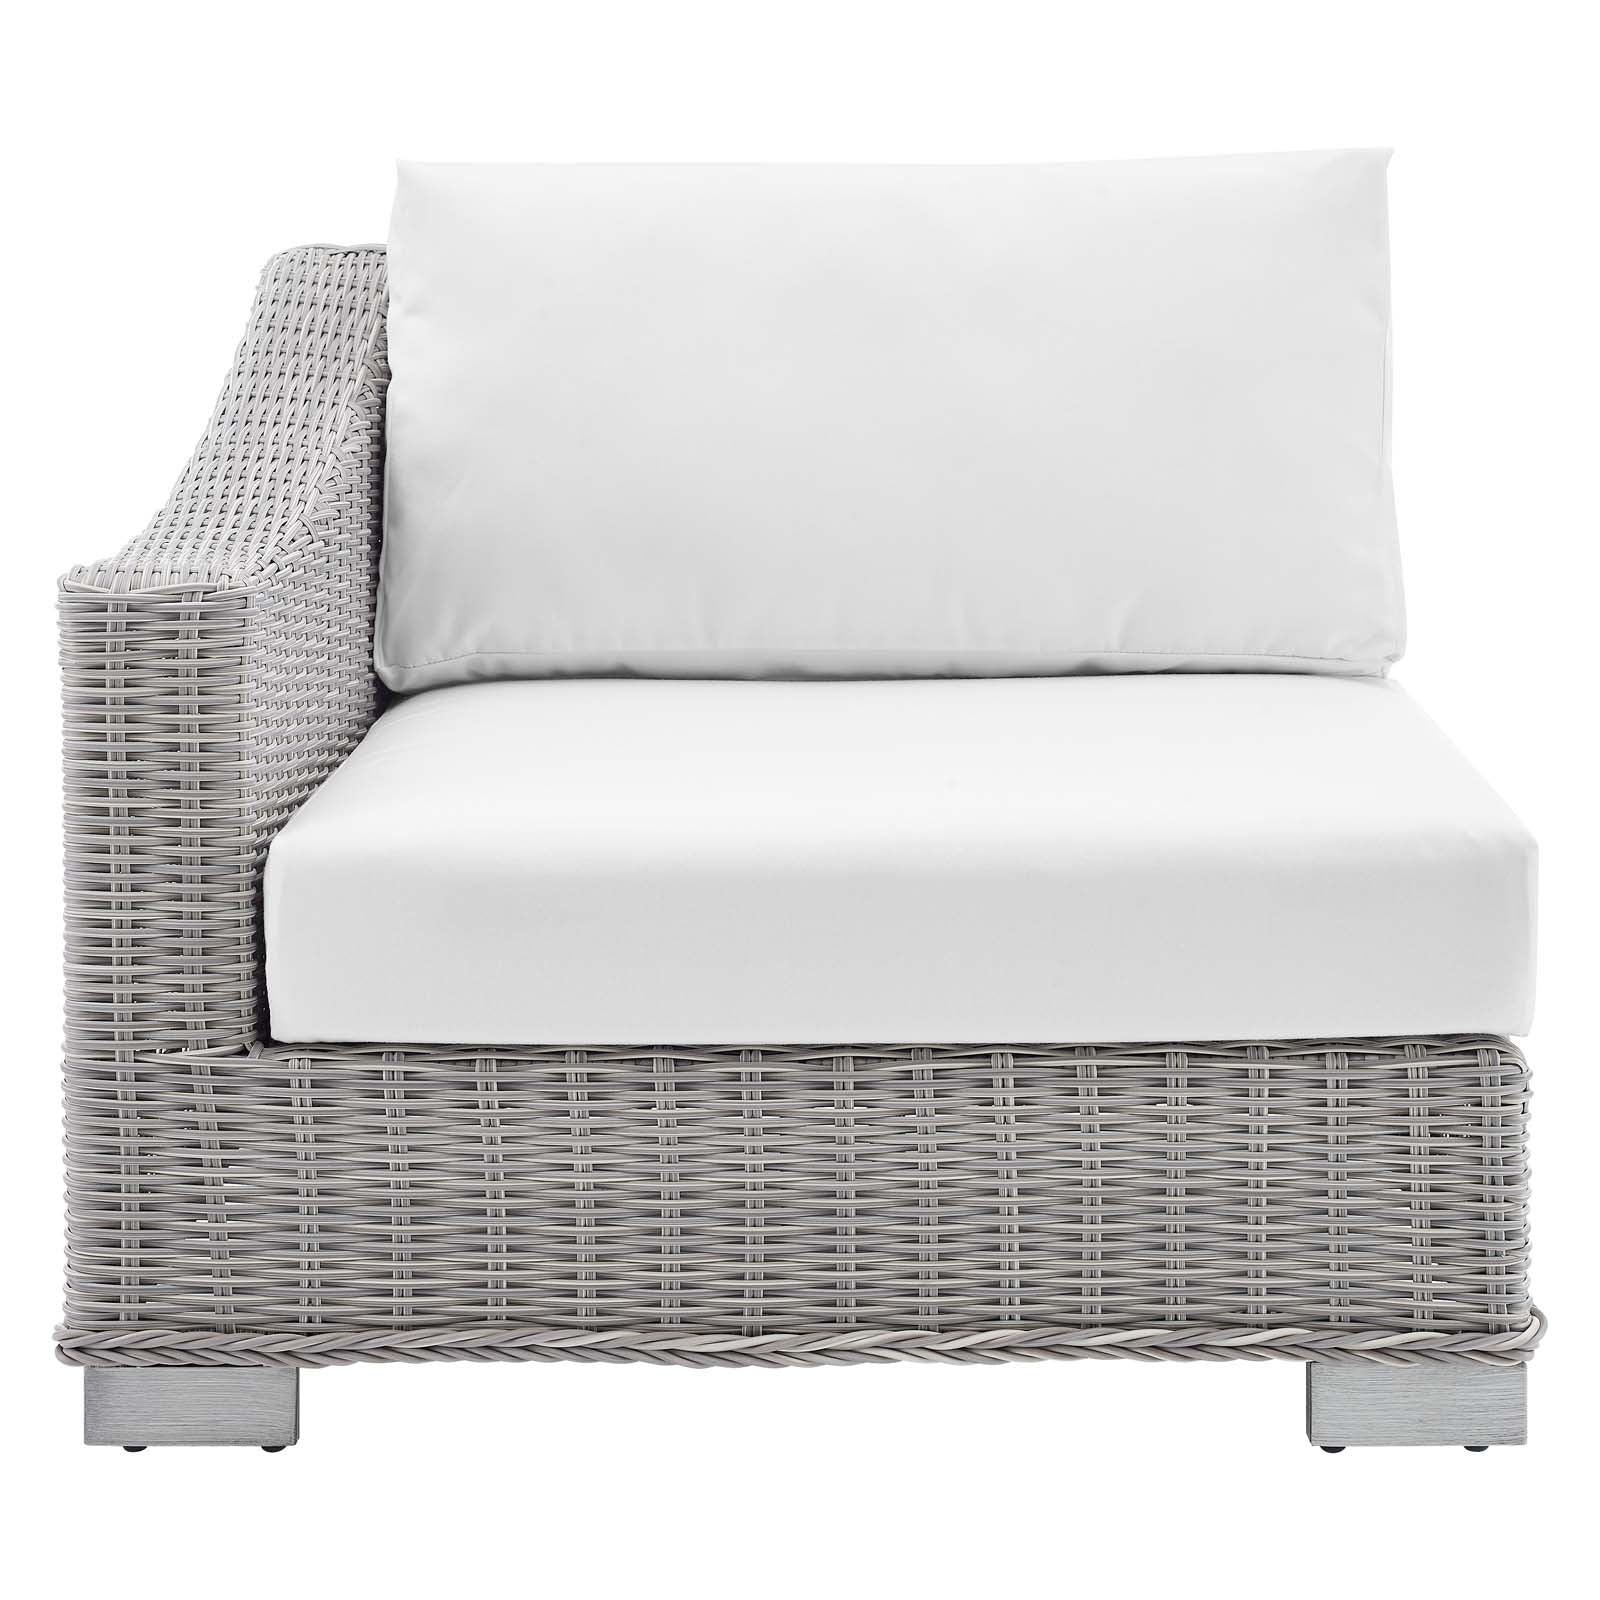 Conway Sunbrella® Outdoor Patio Wicker Rattan Left-Arm Chair - East Shore Modern Home Furnishings